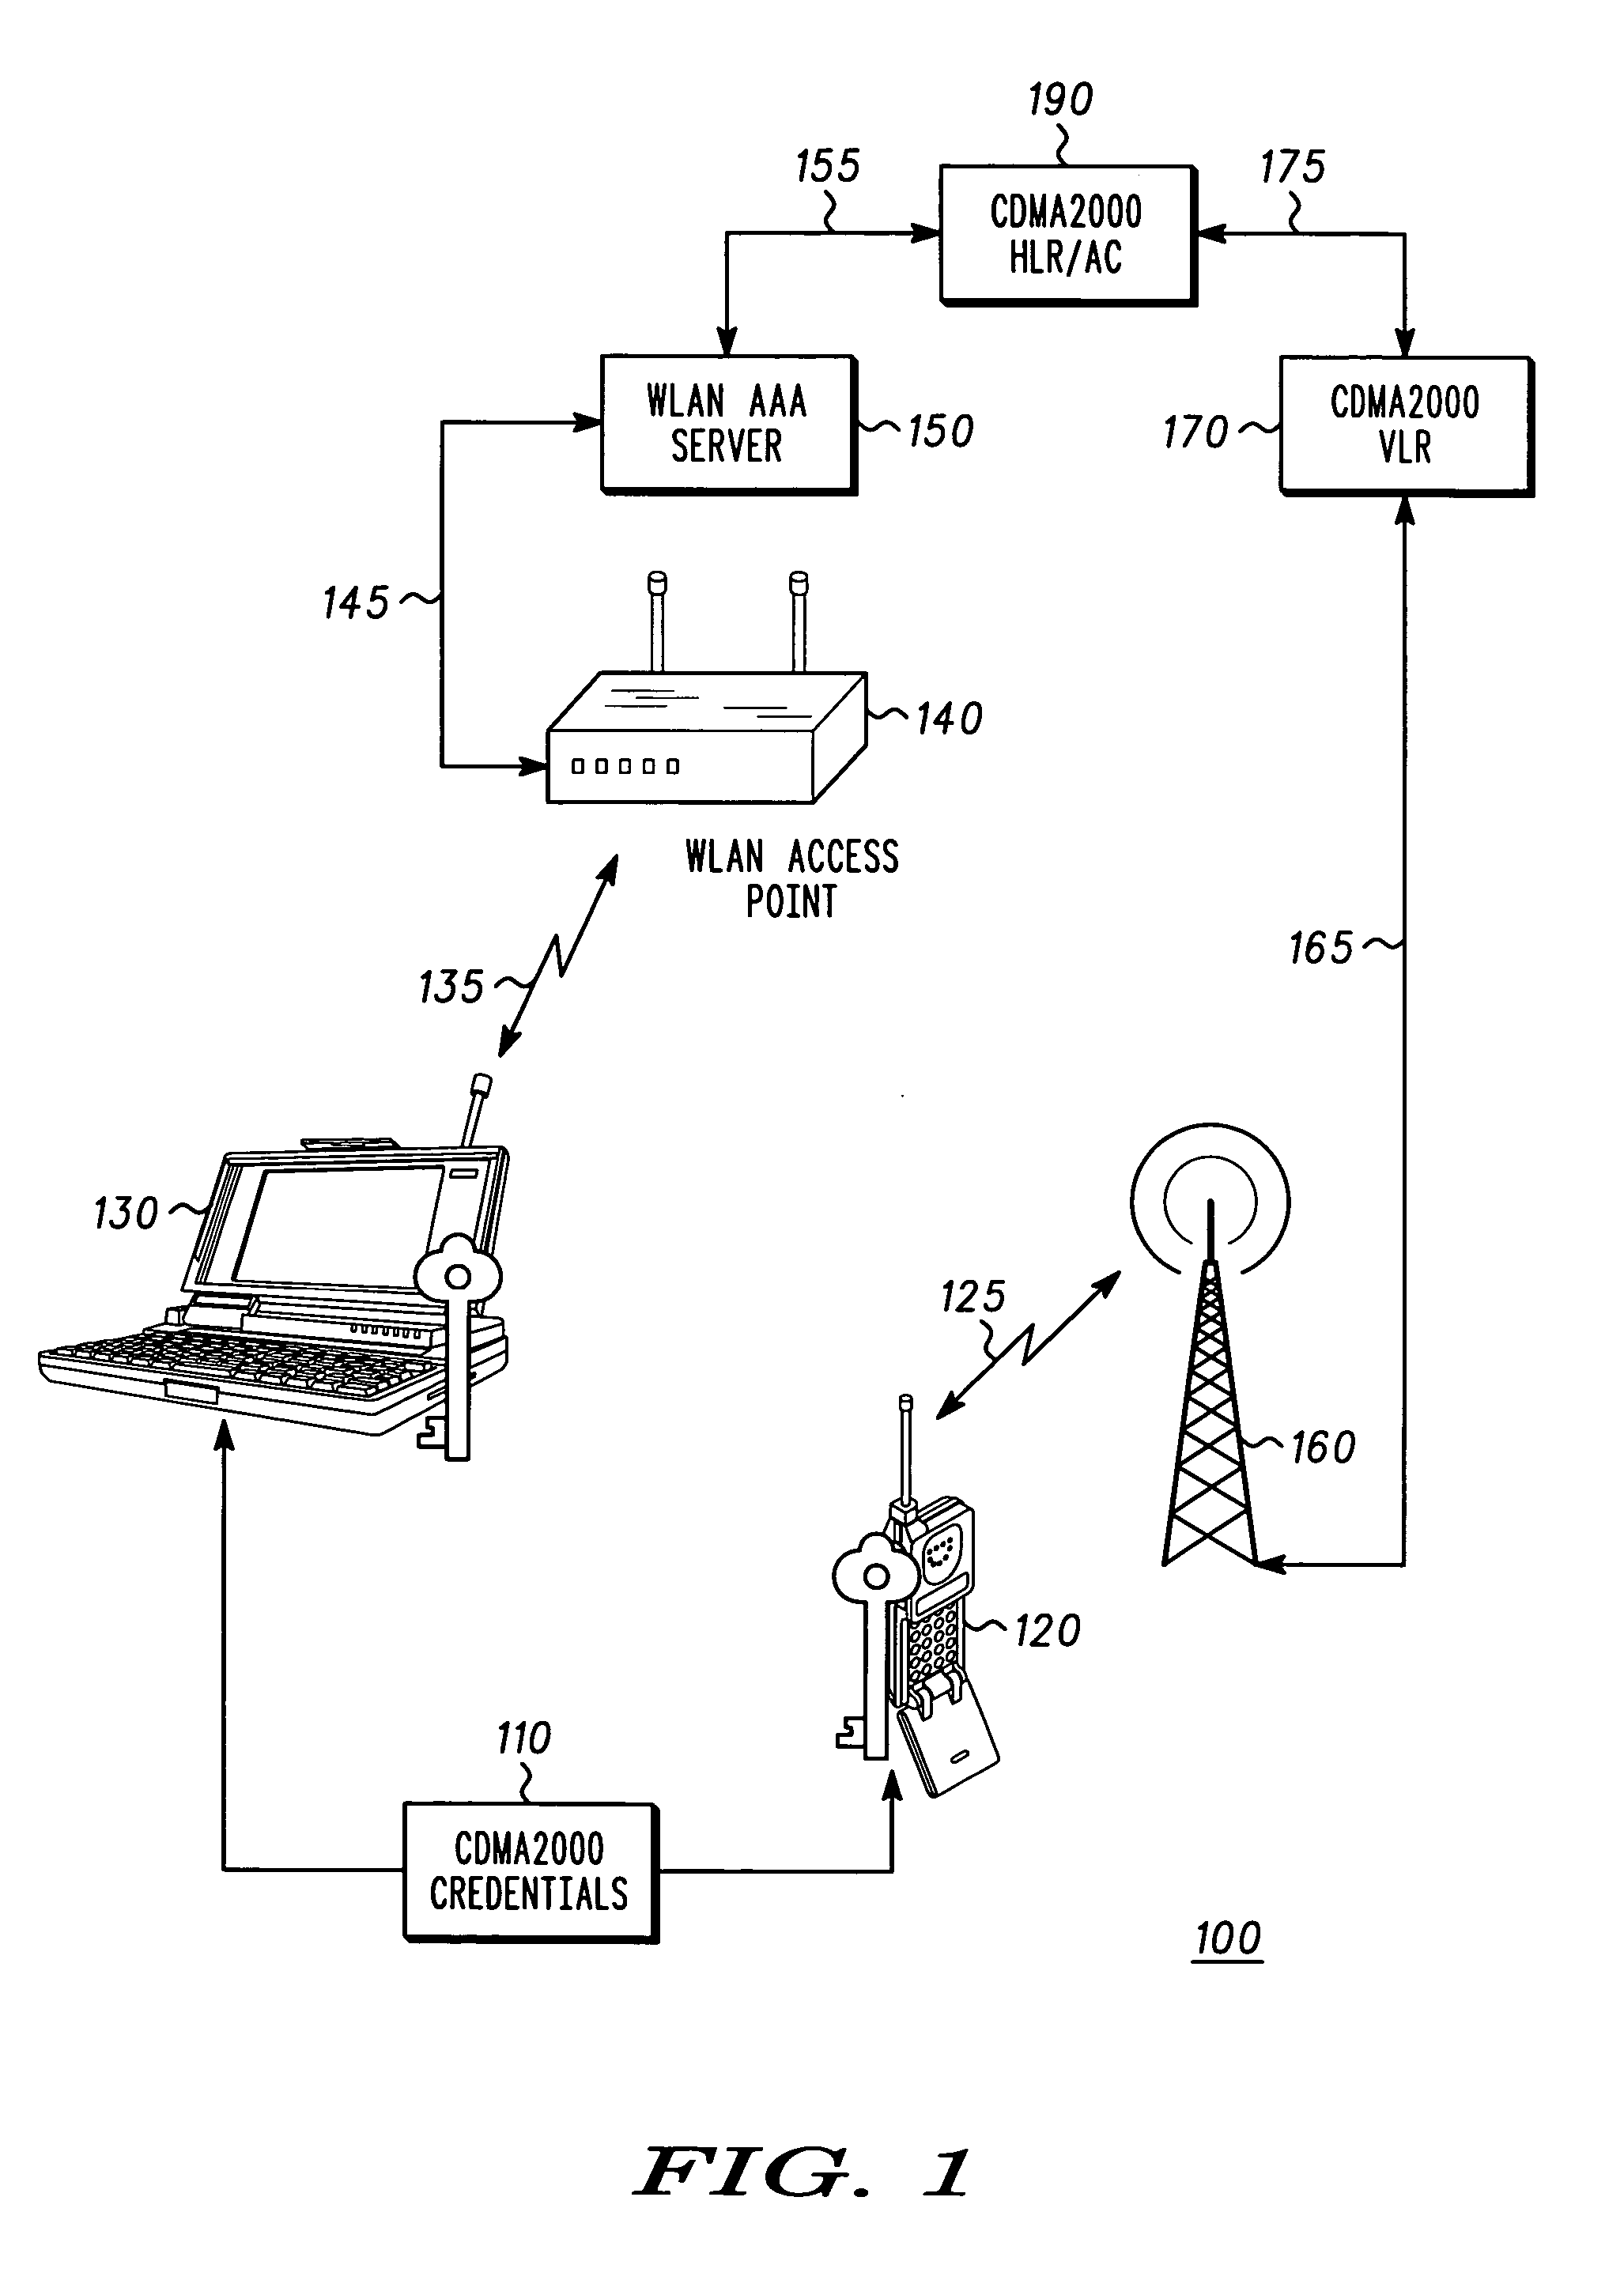 System, method and devices for authentication in a wireless local area network (WLAN)